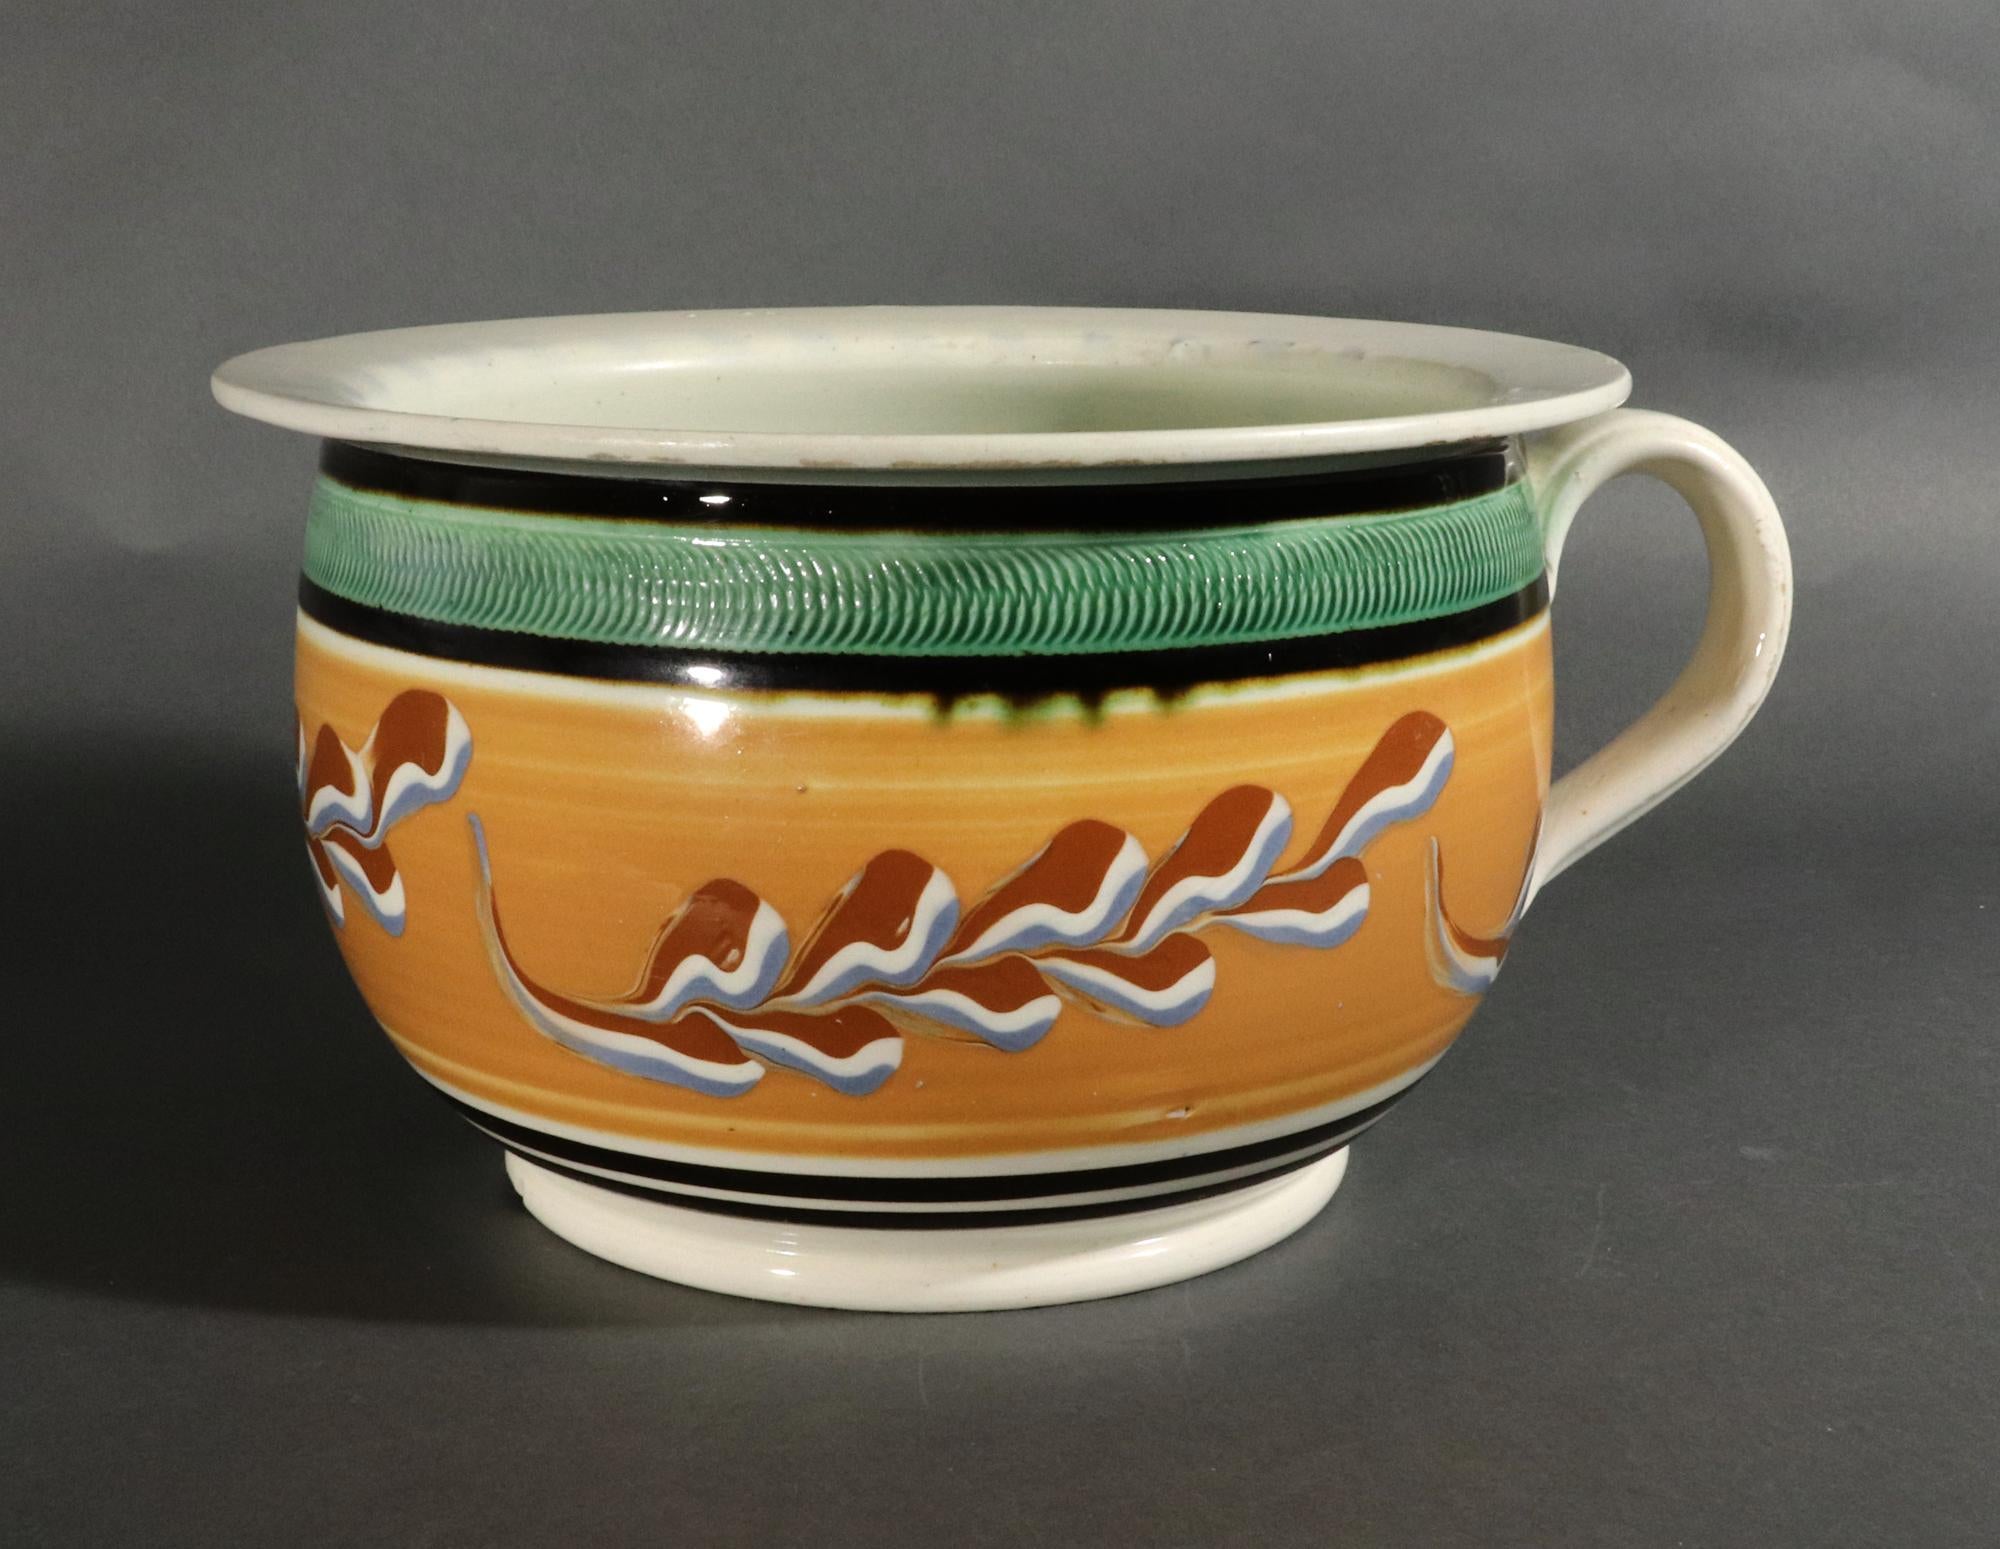 English Pottery Mocha Leaf Pattern With A Light Ochre Band Chamber Pot
Circa 1820

Chamber pots are a rare form in period mocha.  This striking example is of circular form with the body slip-decorated with a ochre ground with tri-color leaves around